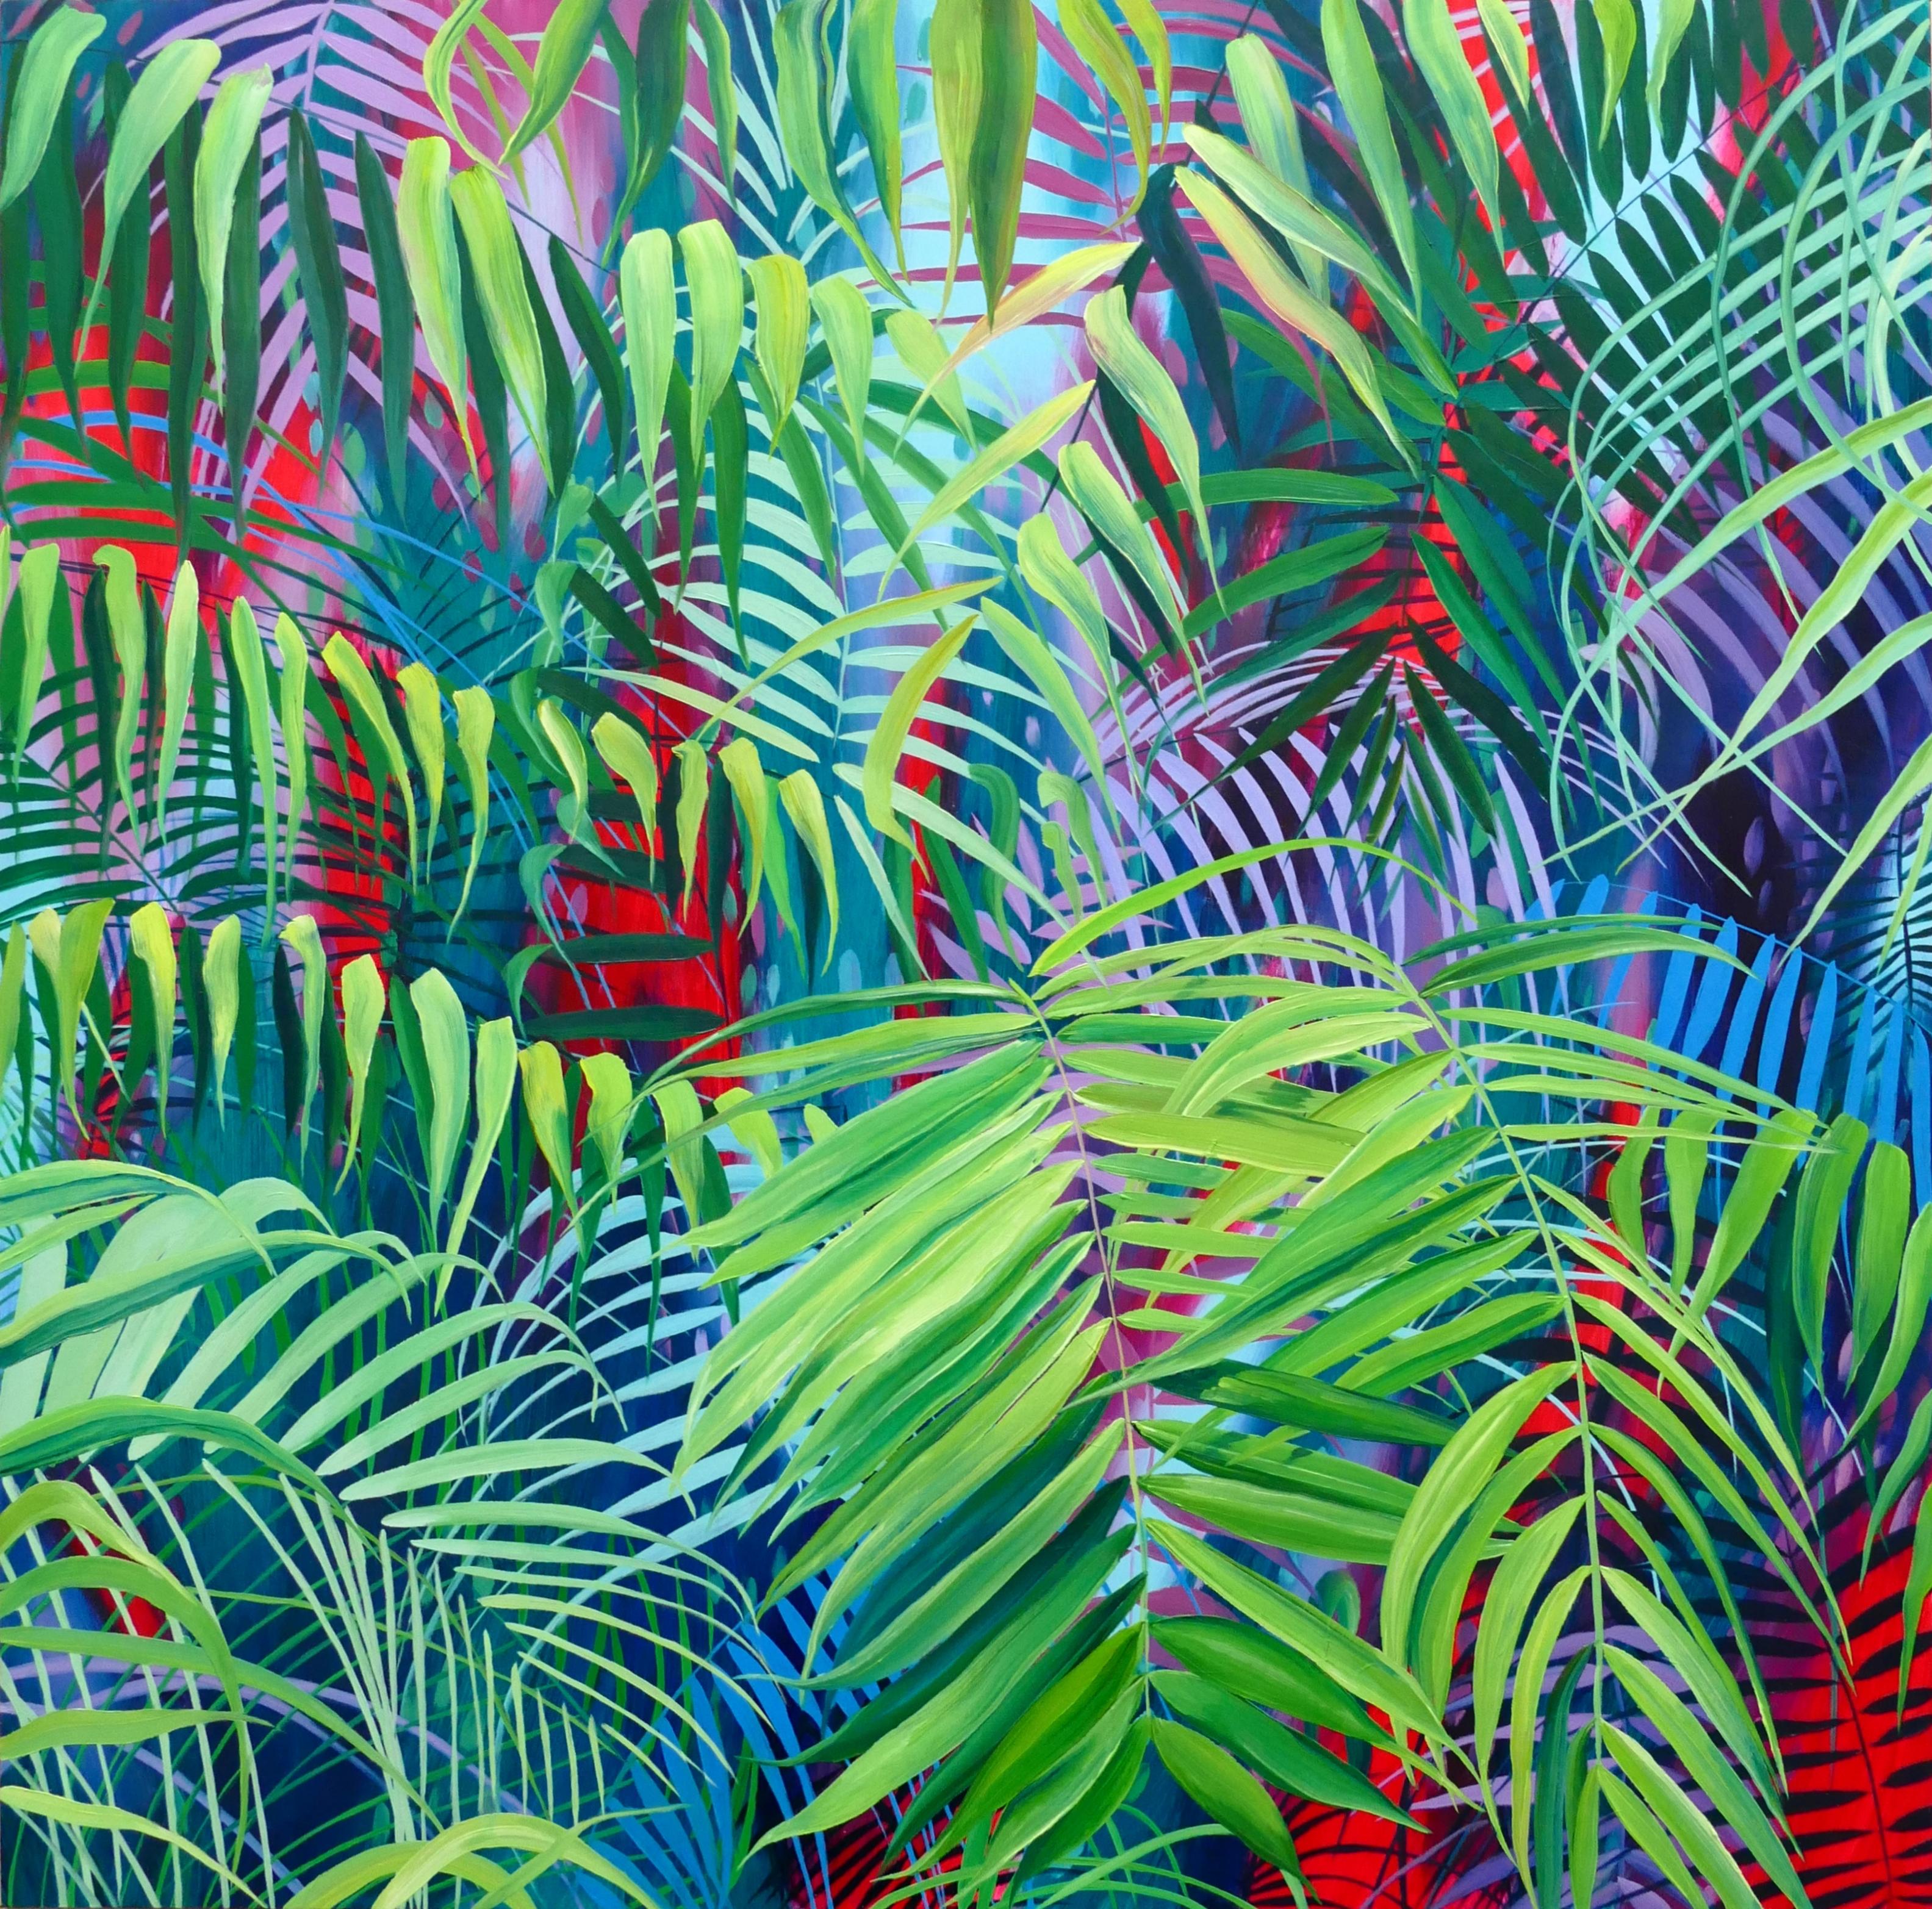 British contemporary artist Alanna Eakin's particular interest in tropical plants formed during lockdown when we were unable to travel and there was a longing for an escape. Through a combination of memories, collected imagery and plant studies she